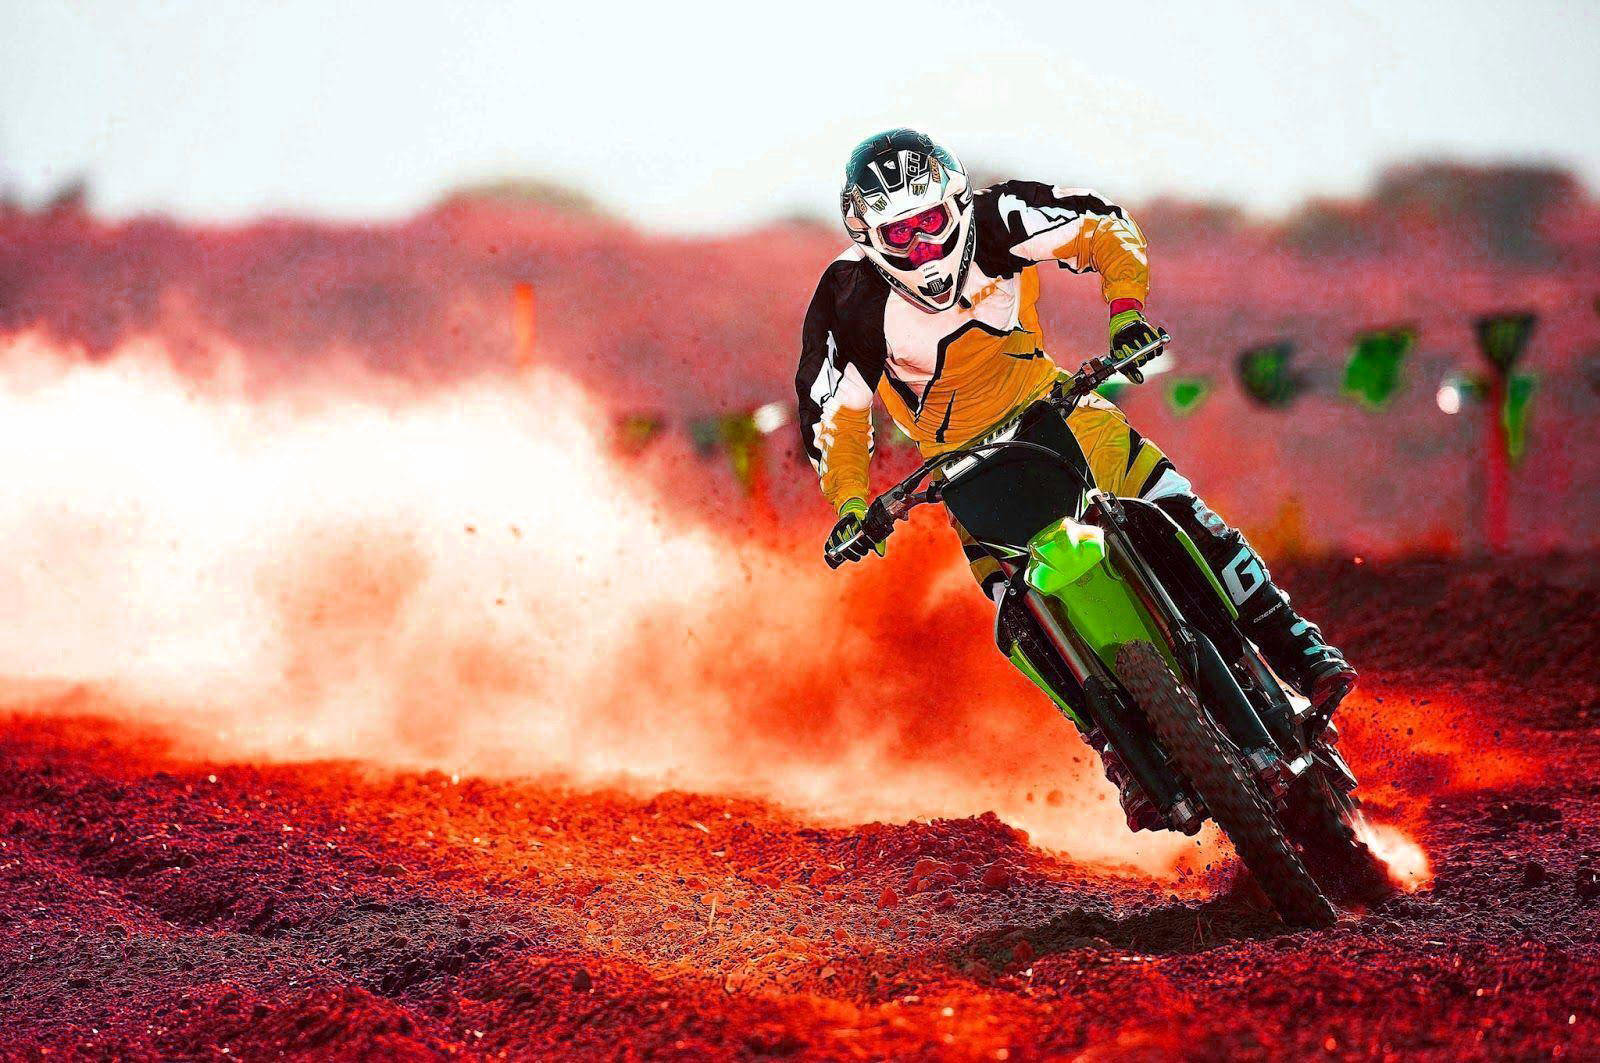 Cool Bike Rider With Fire Trail Wallpaper